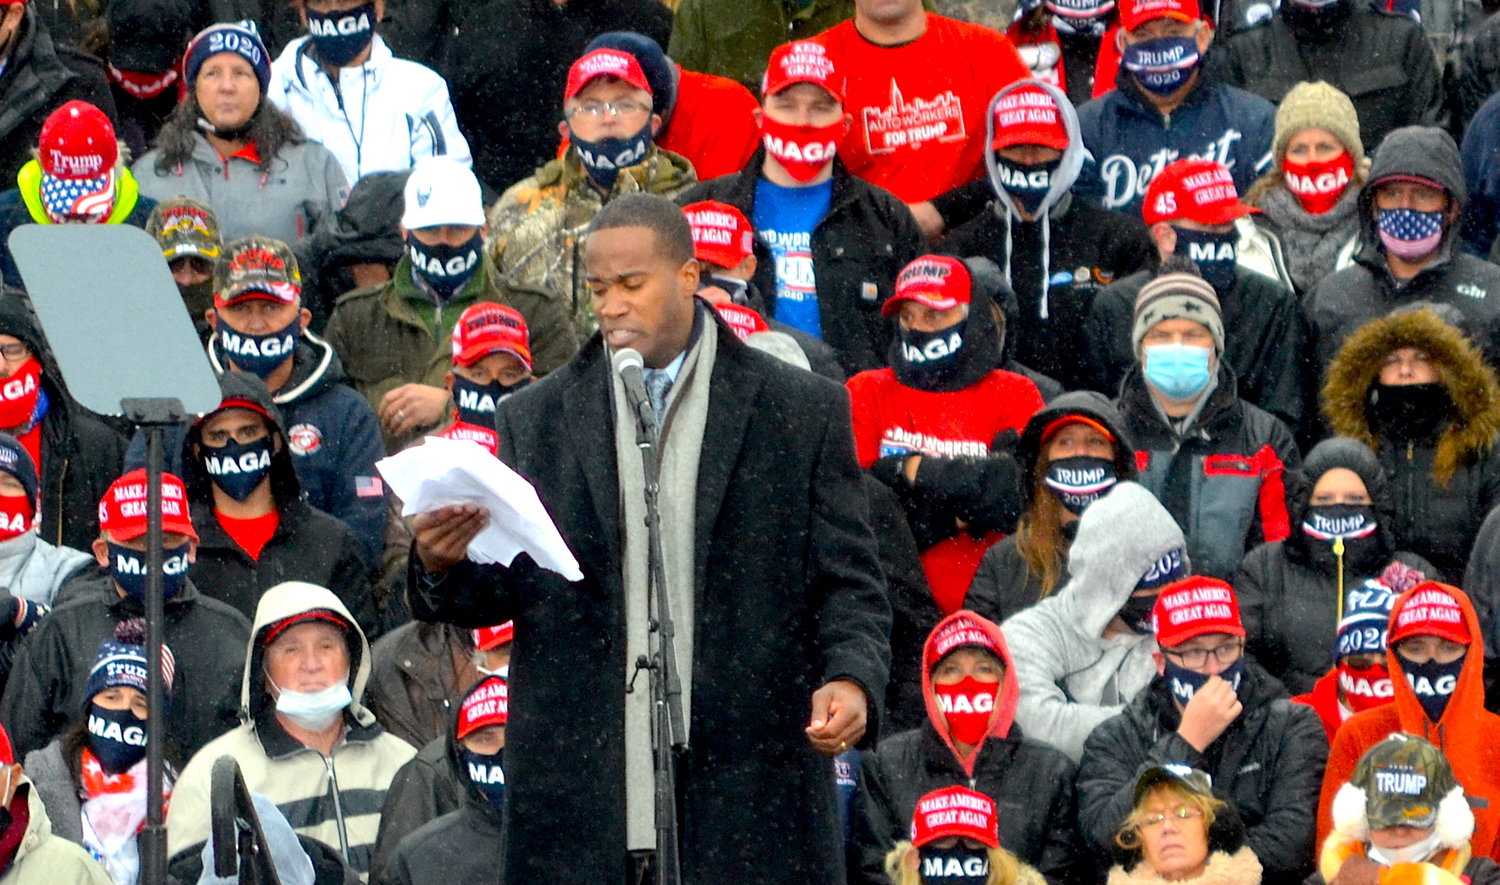 John James, the GOP candidate for the U.S. Senate from Michigan, reads remarks.